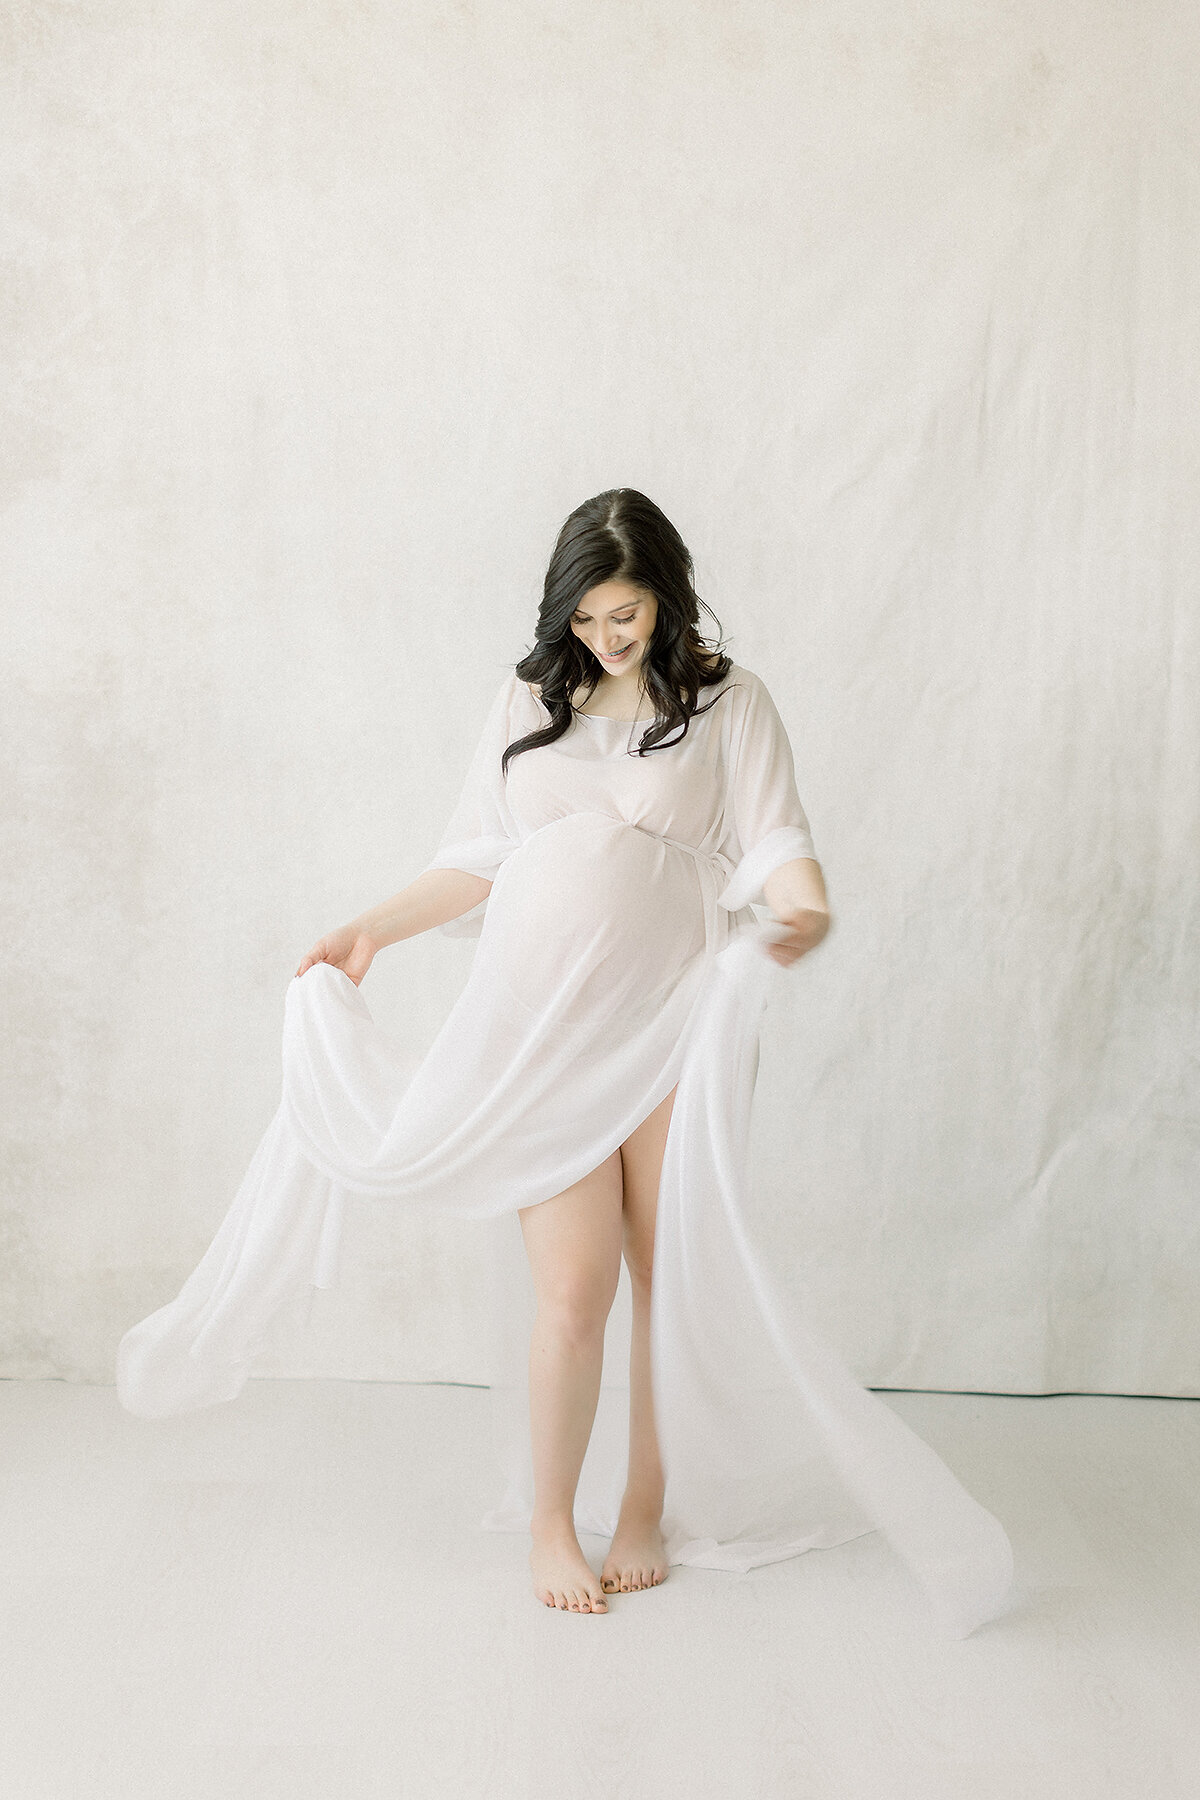 A photo taken for a maternity session in a Dallas/Fort Worth area photography studio of an expecting mother while she is playfully swaying around her chiffon maternity dress.